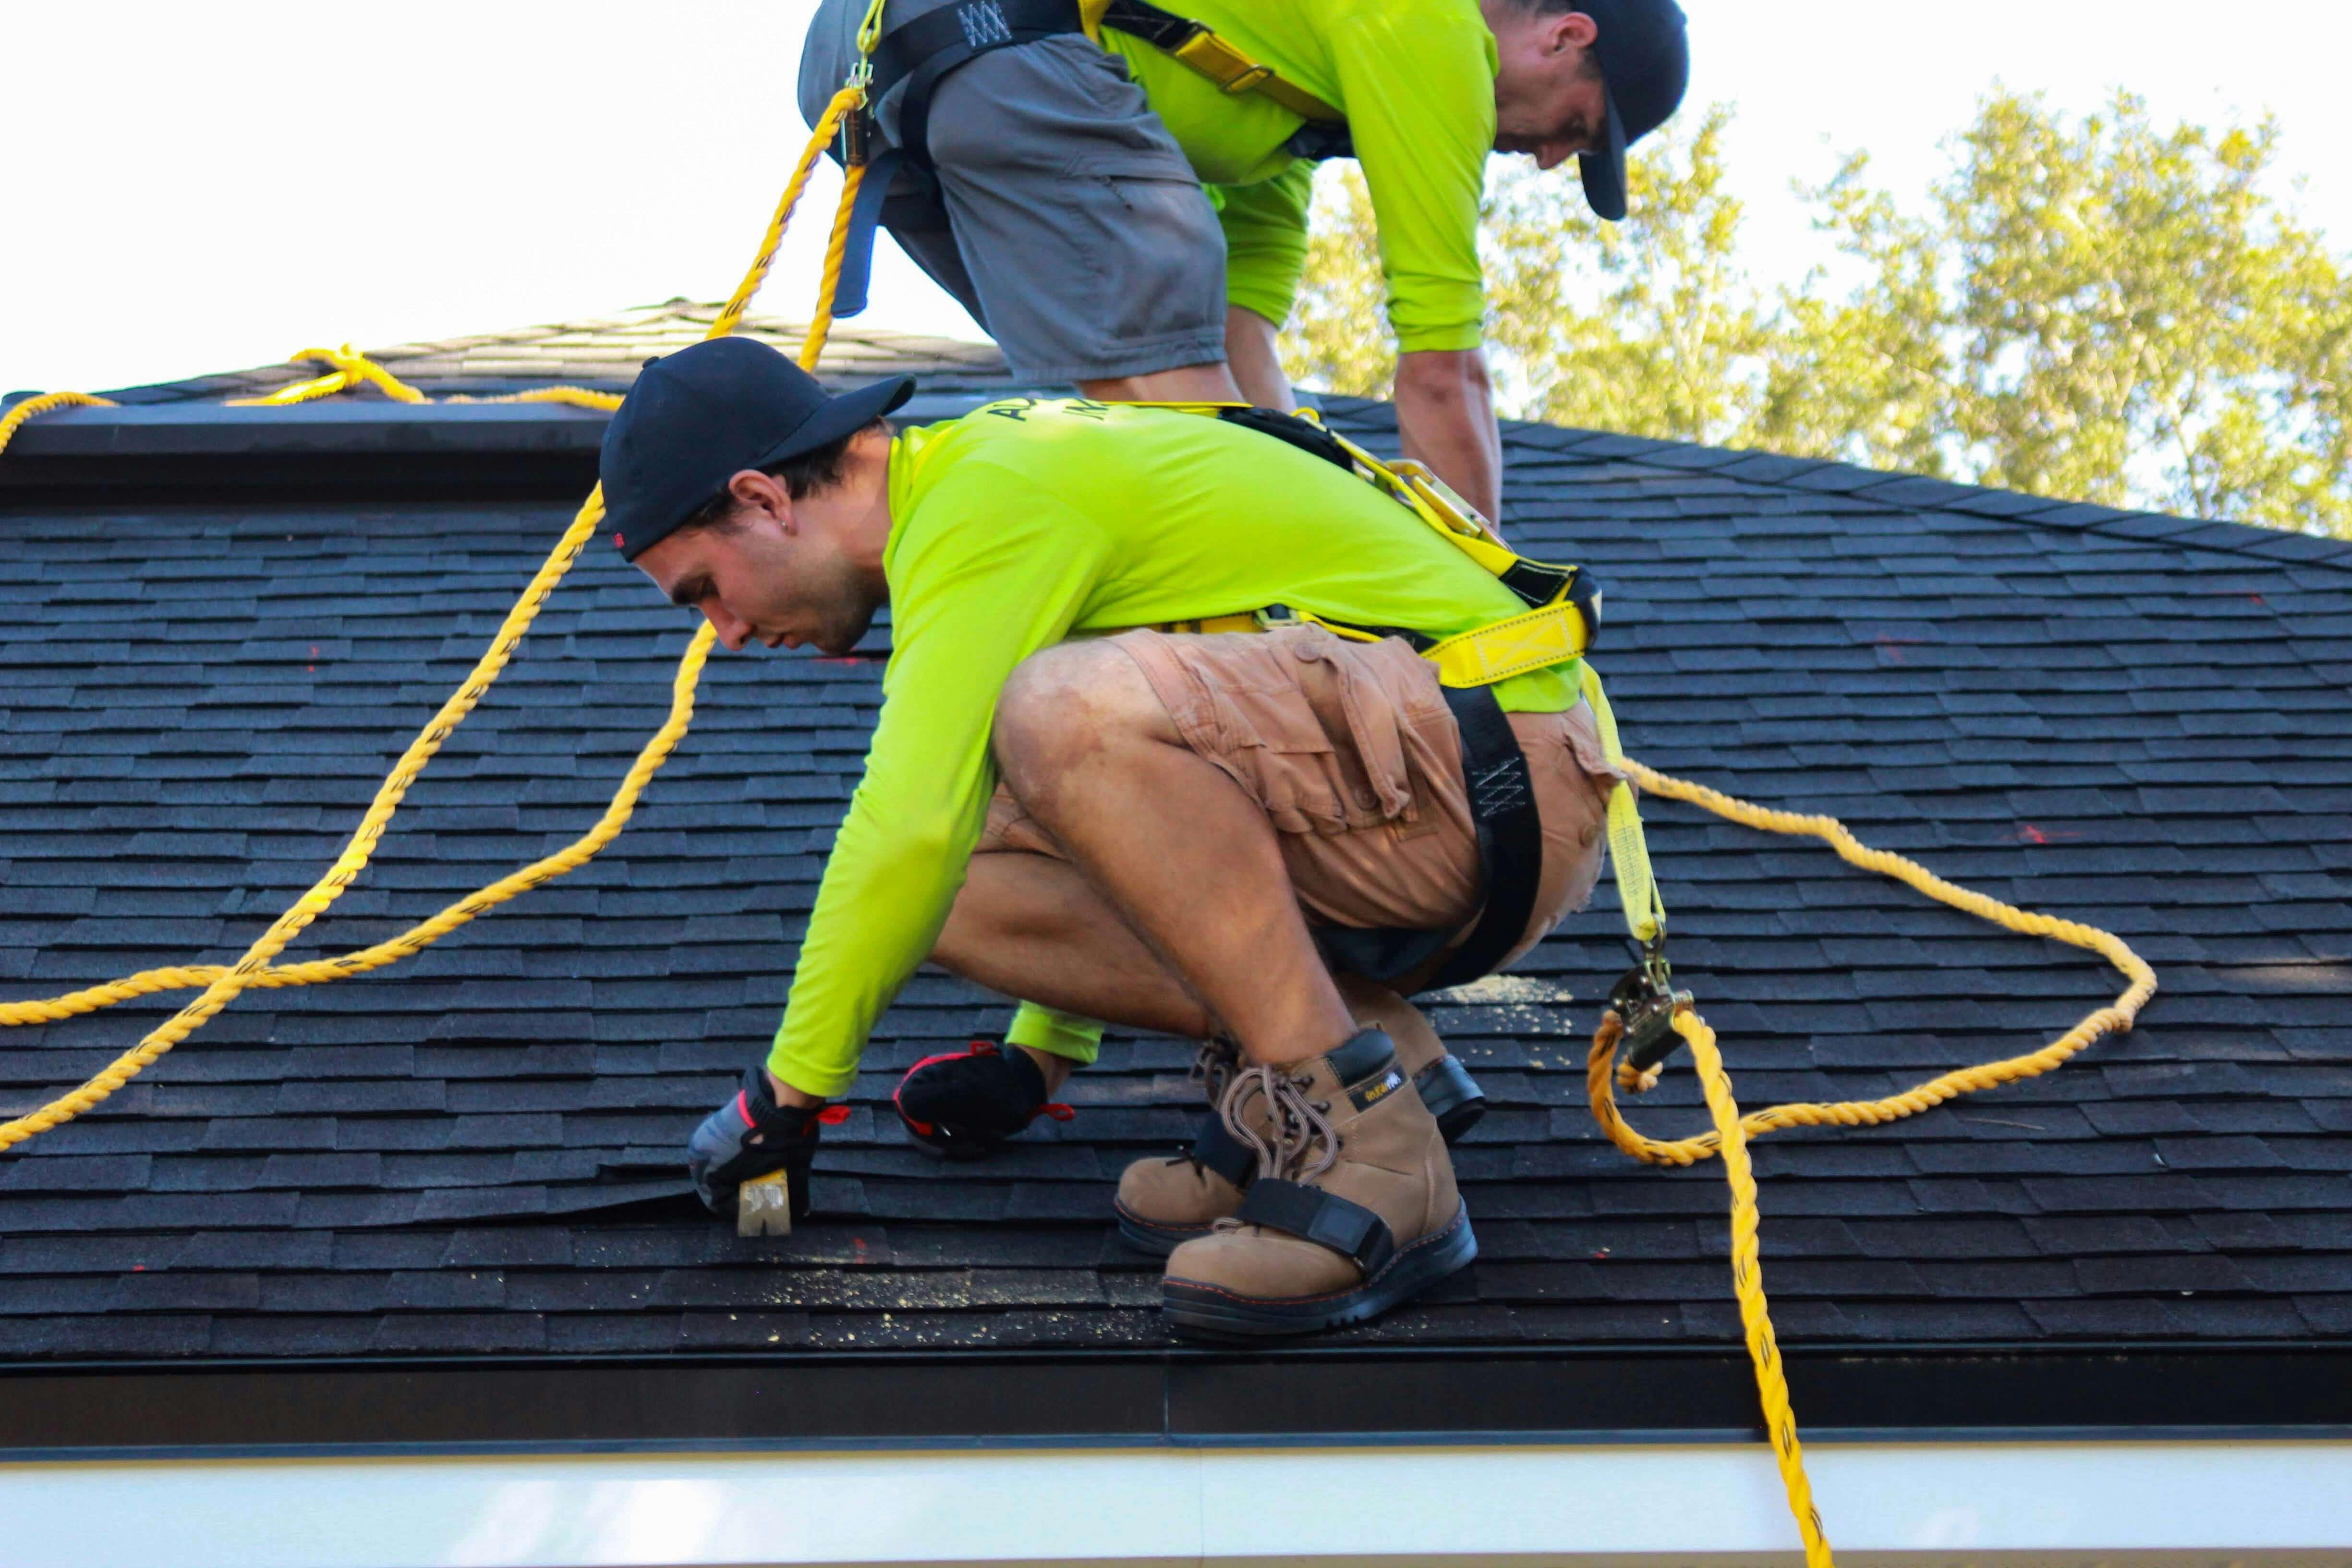 The Ultimate Guide to Digital Marketing Services for Roofing Contractors